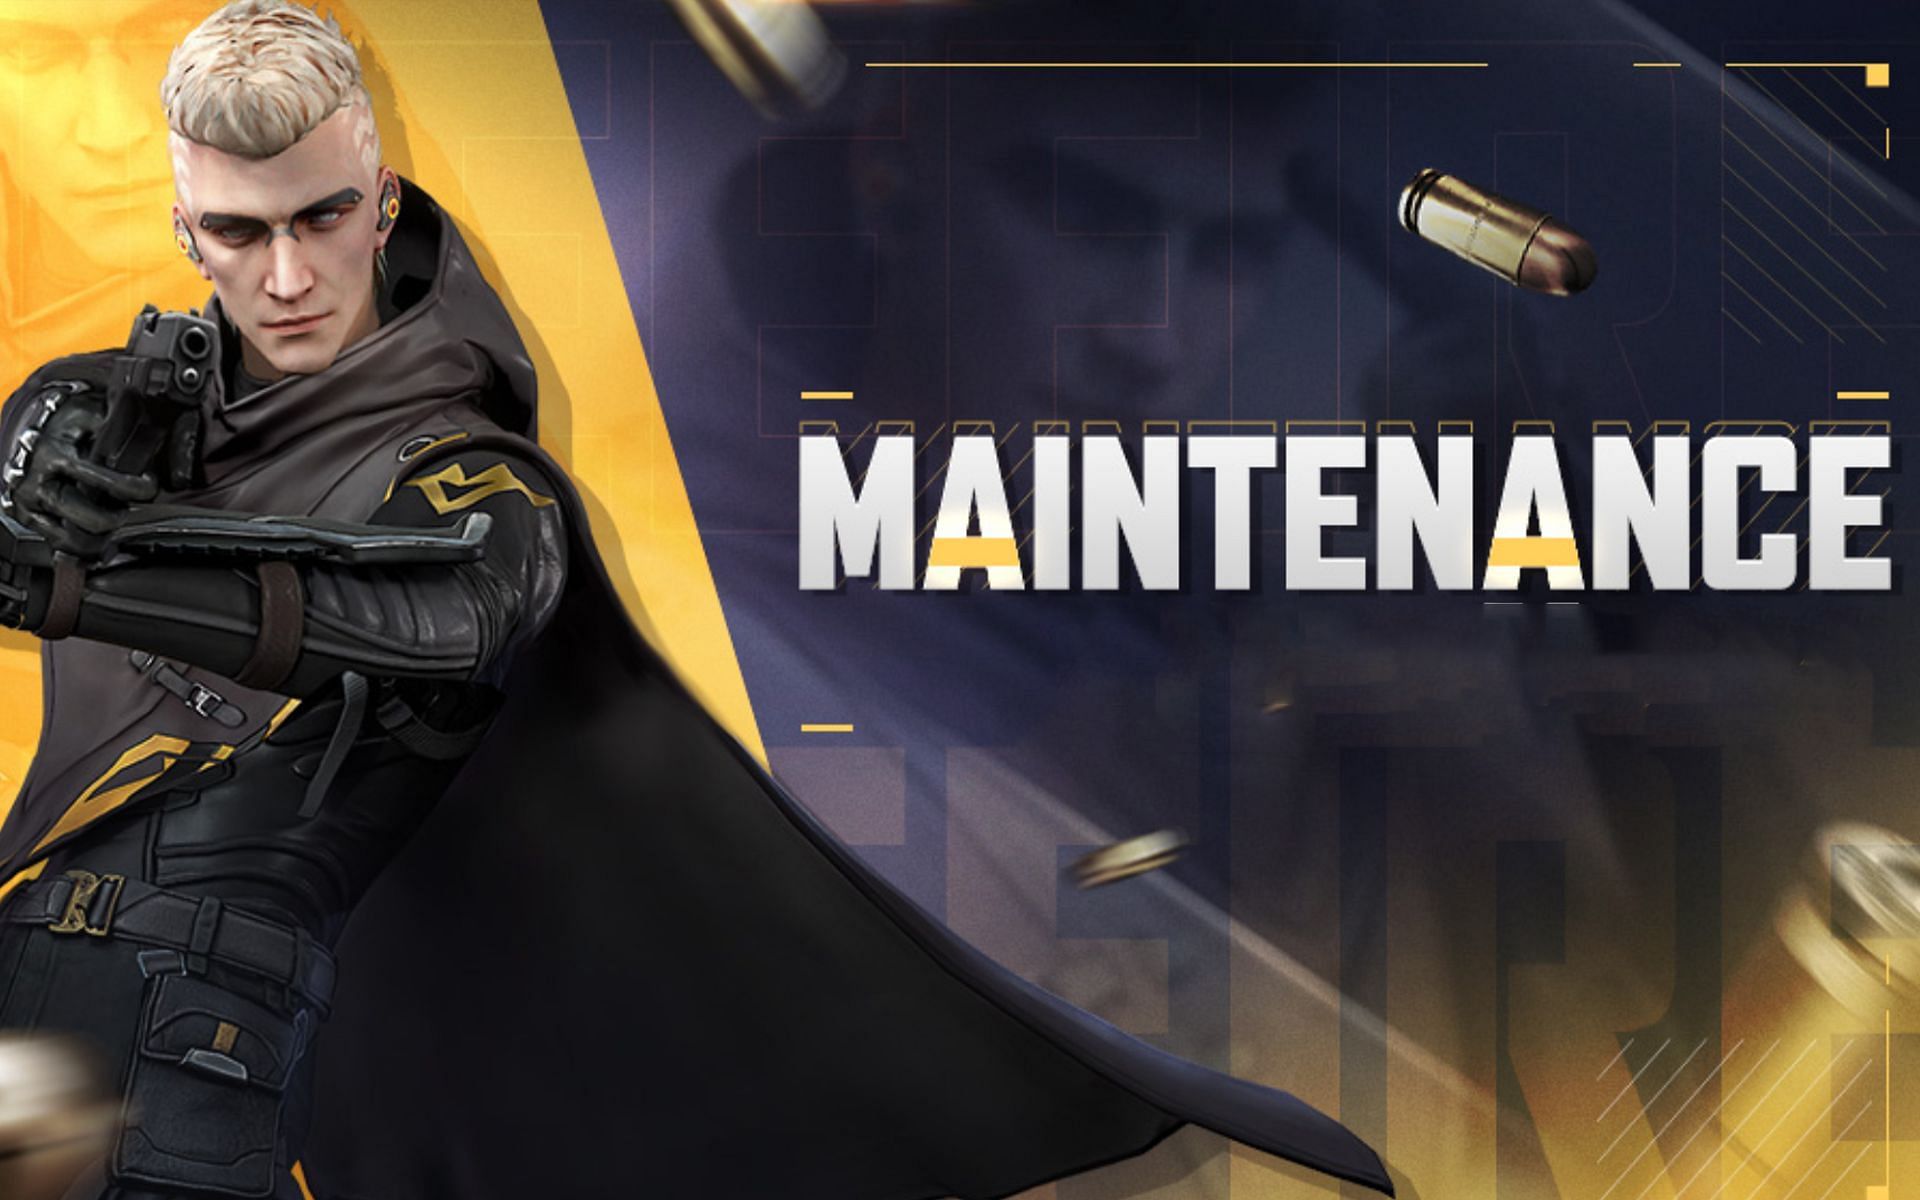 Details about the Free Fire MAX OB34 maintenance (Image via Sportskeeda)